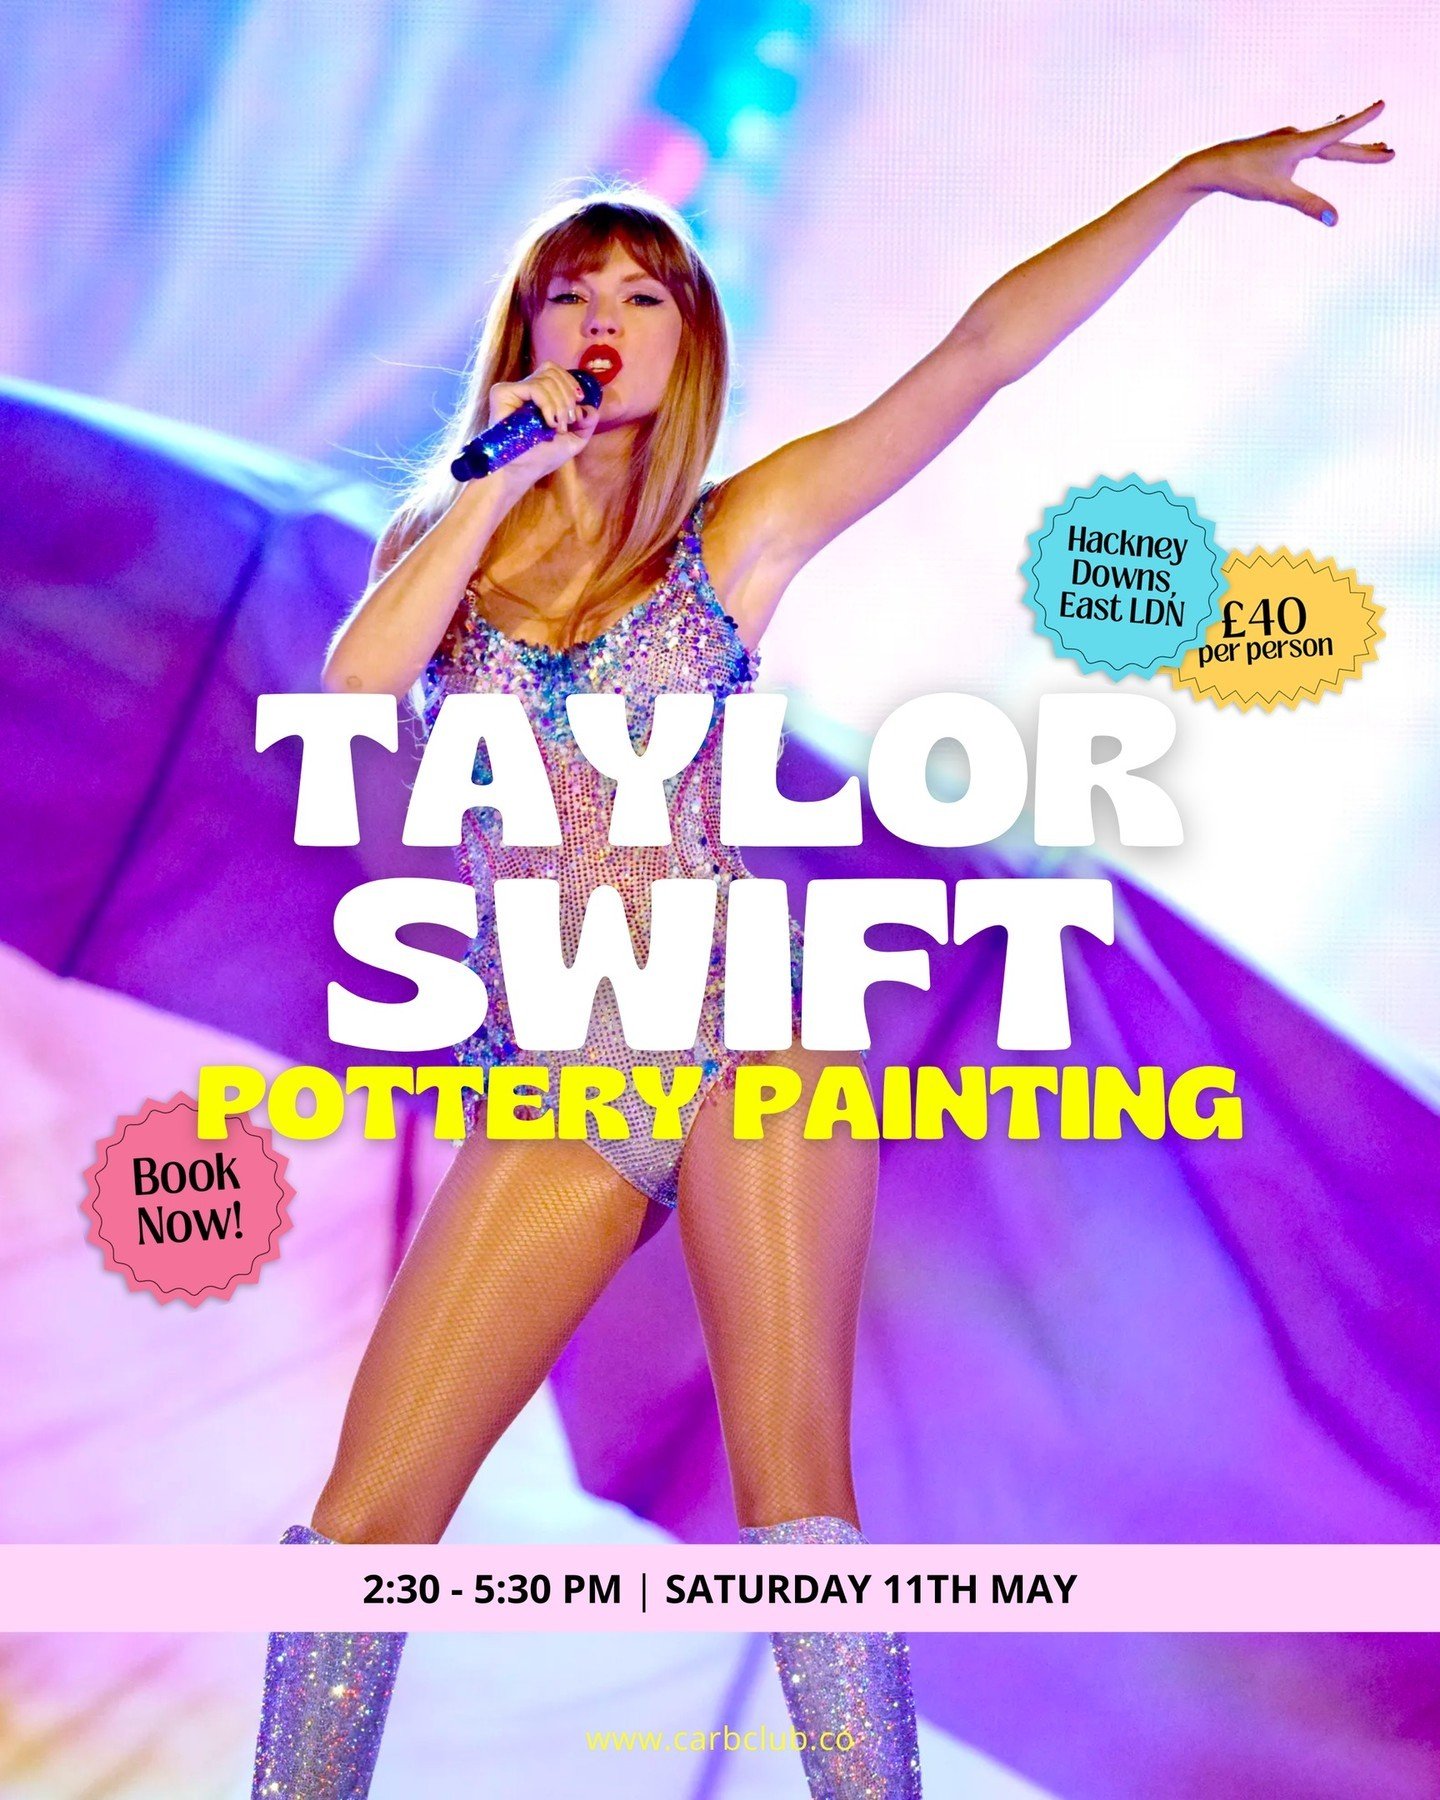 2:30 PM SATURDAY 11TH MAY⁠
⁠
Taylor Swift 🤝 Pottery Painting! ⁠
⁠
Shake off the bad vibes and enter your Picasso era with our Taylor Swift Pottery Painting workshop in Hackney Downs! We&rsquo;ll be squeezing in as many hits from Taylor Swift as poss